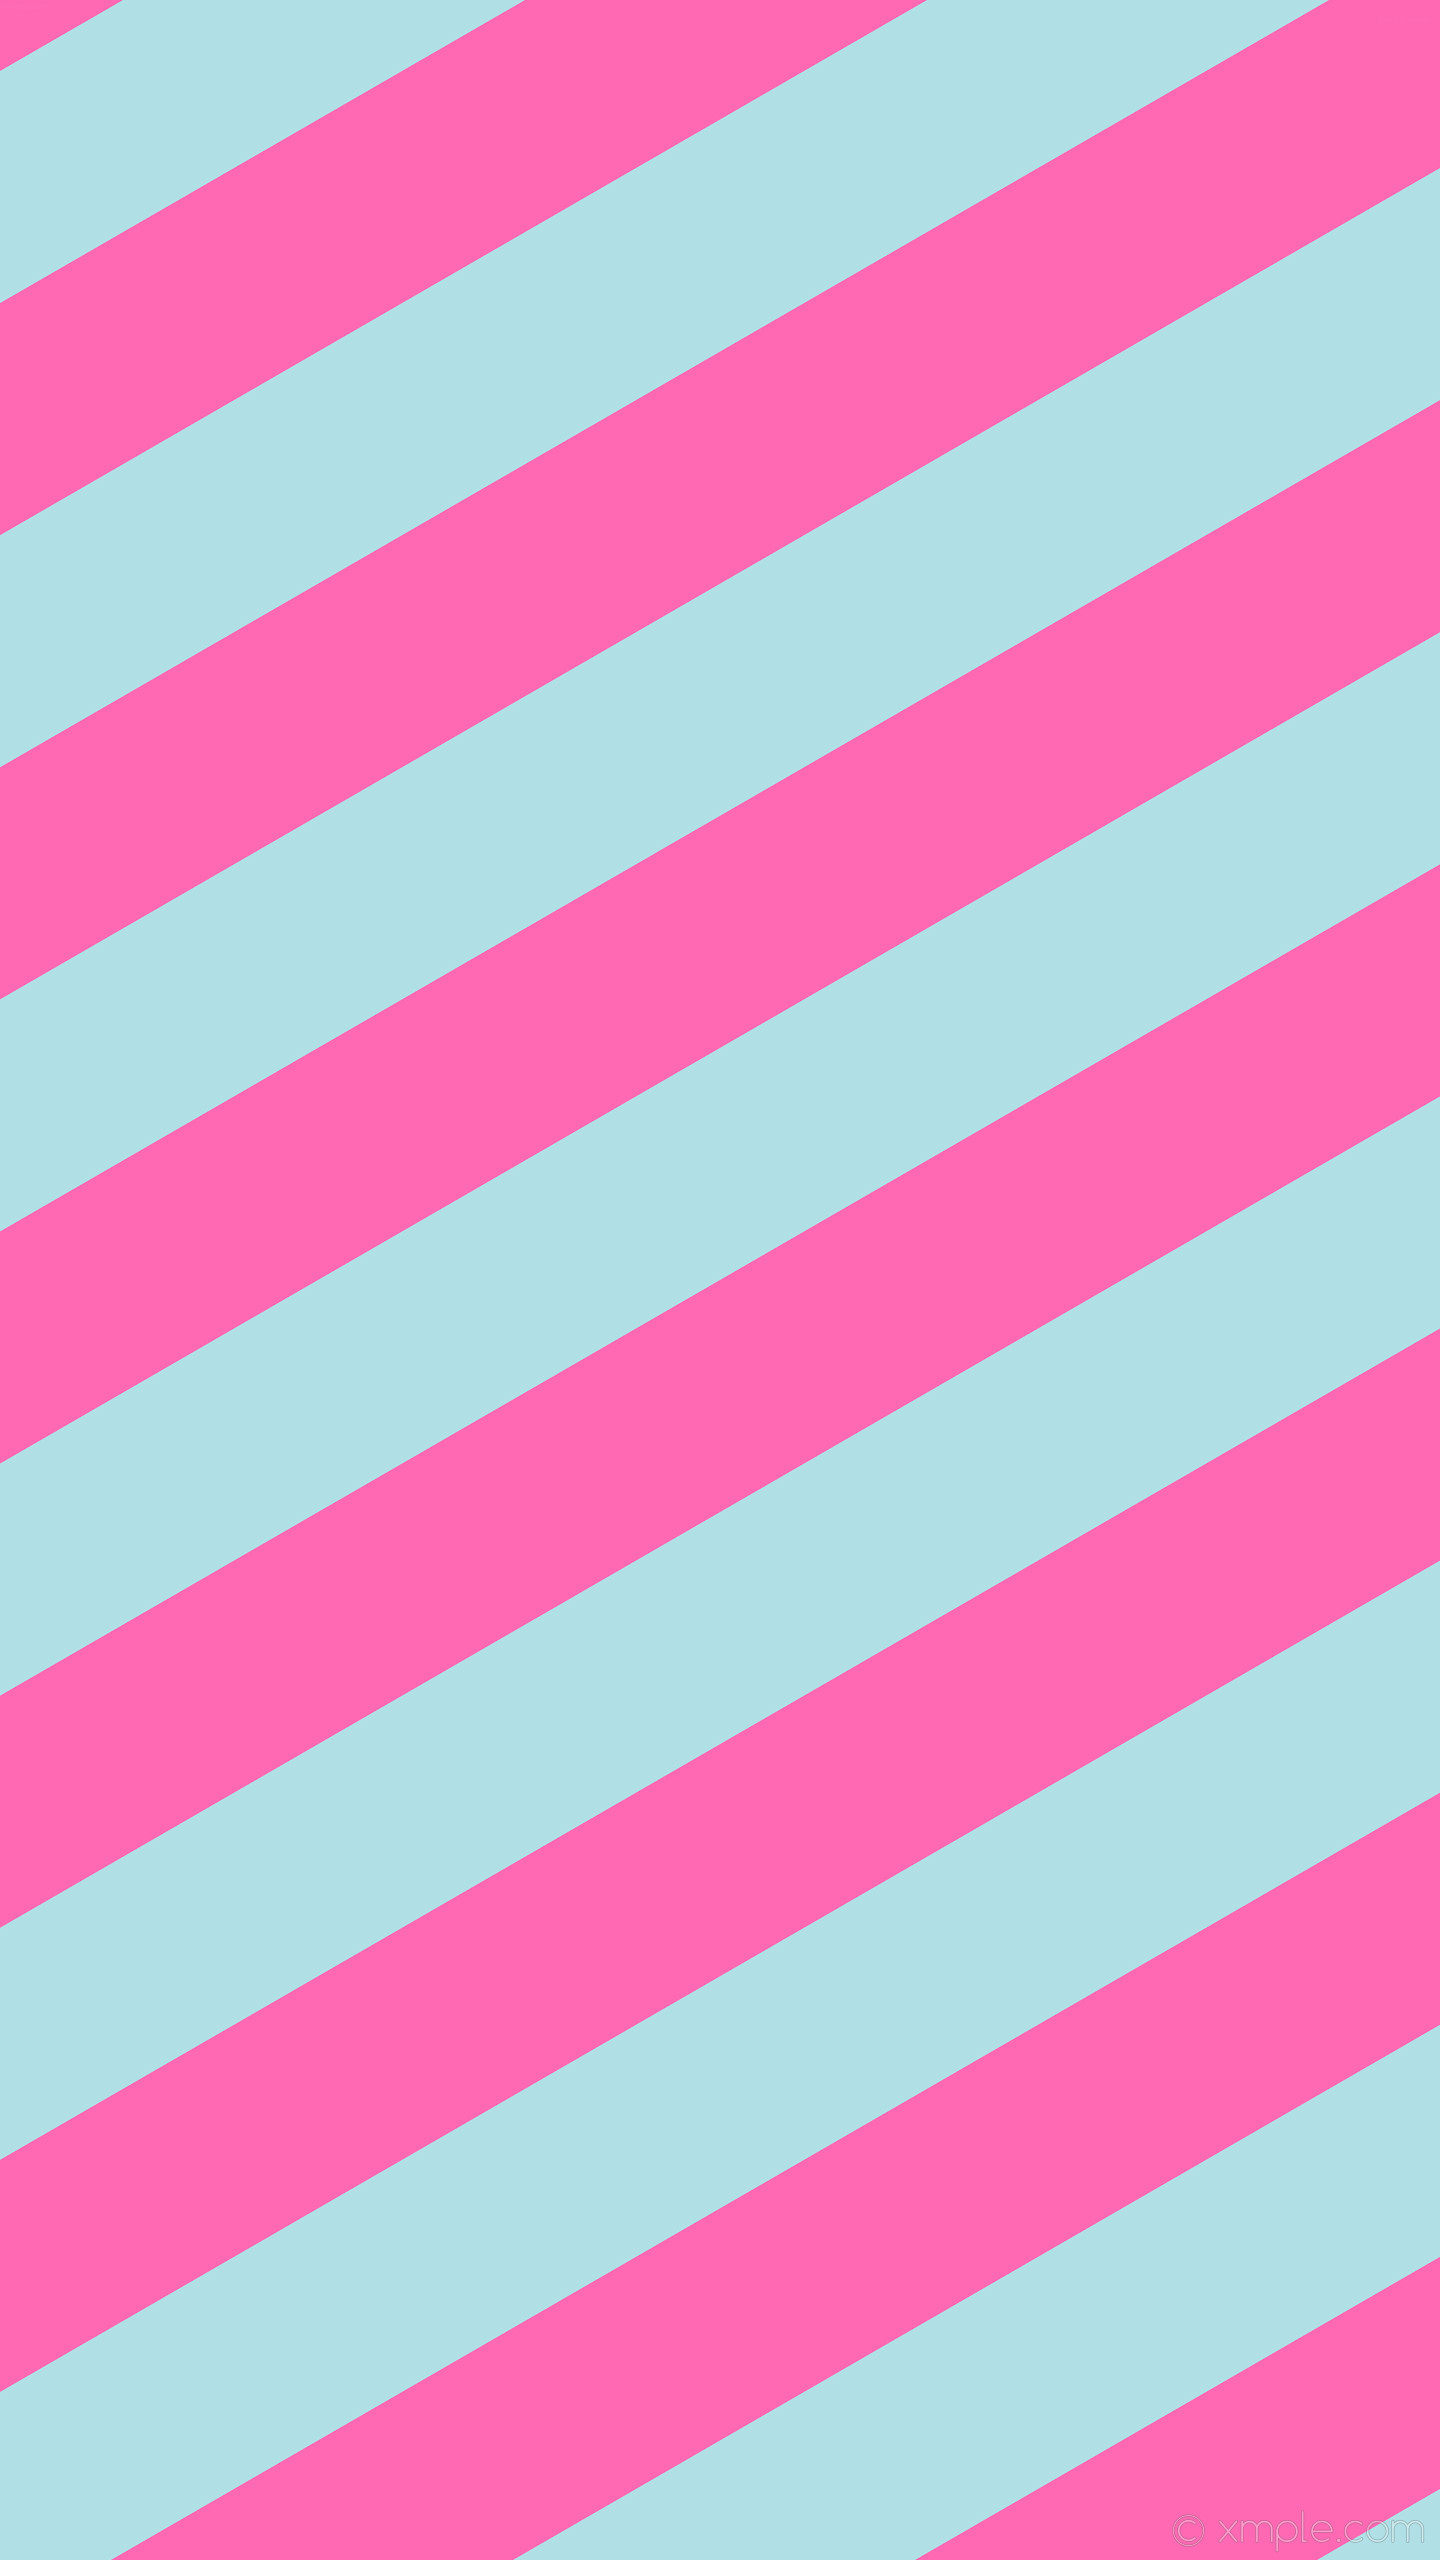 1440x2560 Teal And Pink Striped Wallpaper